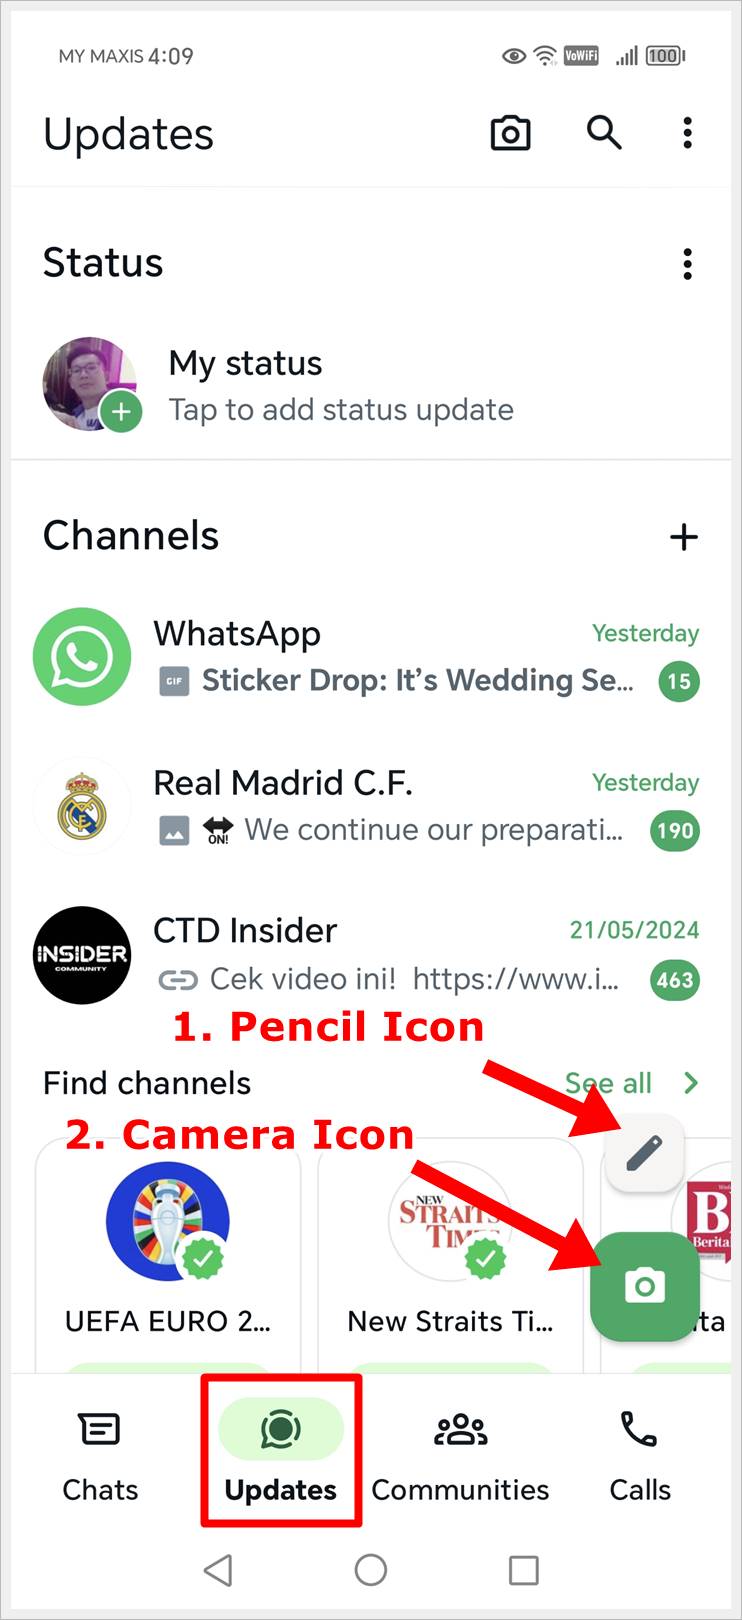 WhatsApp Updates Screen (Represented by the "Updates" Tab) Symbols & Icons.